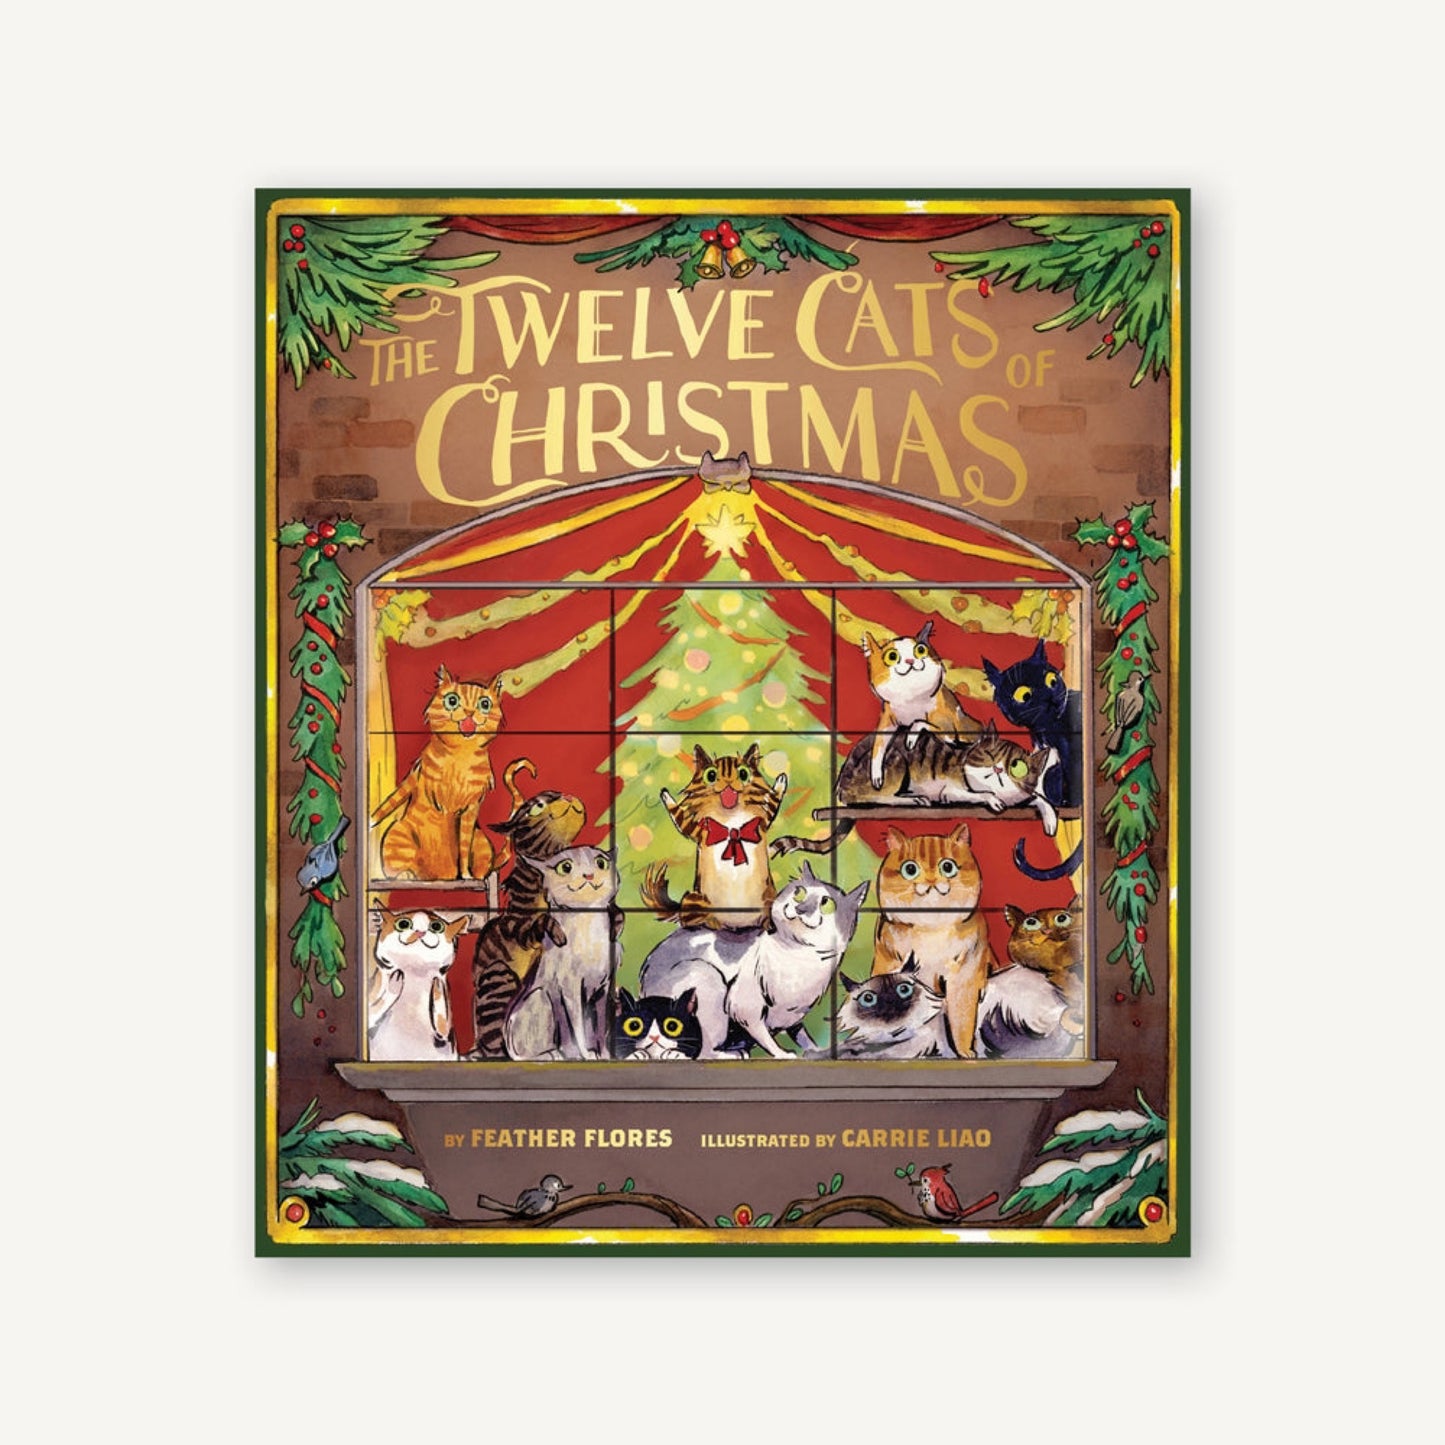 The Twelve Cats of Christmas (book)